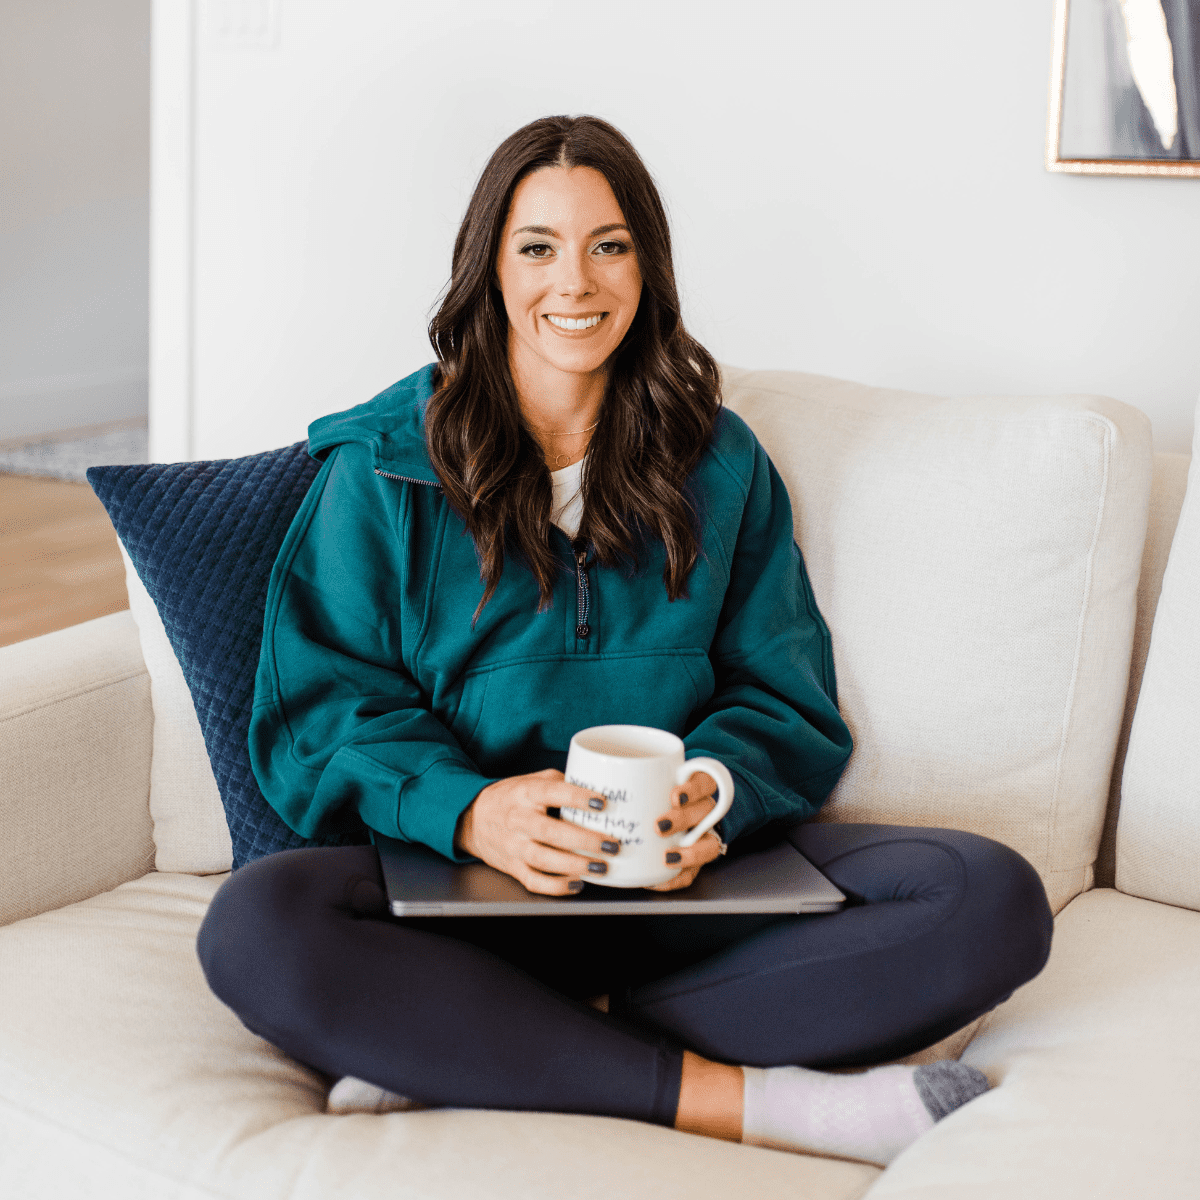 Kacie Barnes sitting on a couch holding her laptop and coffee mug.